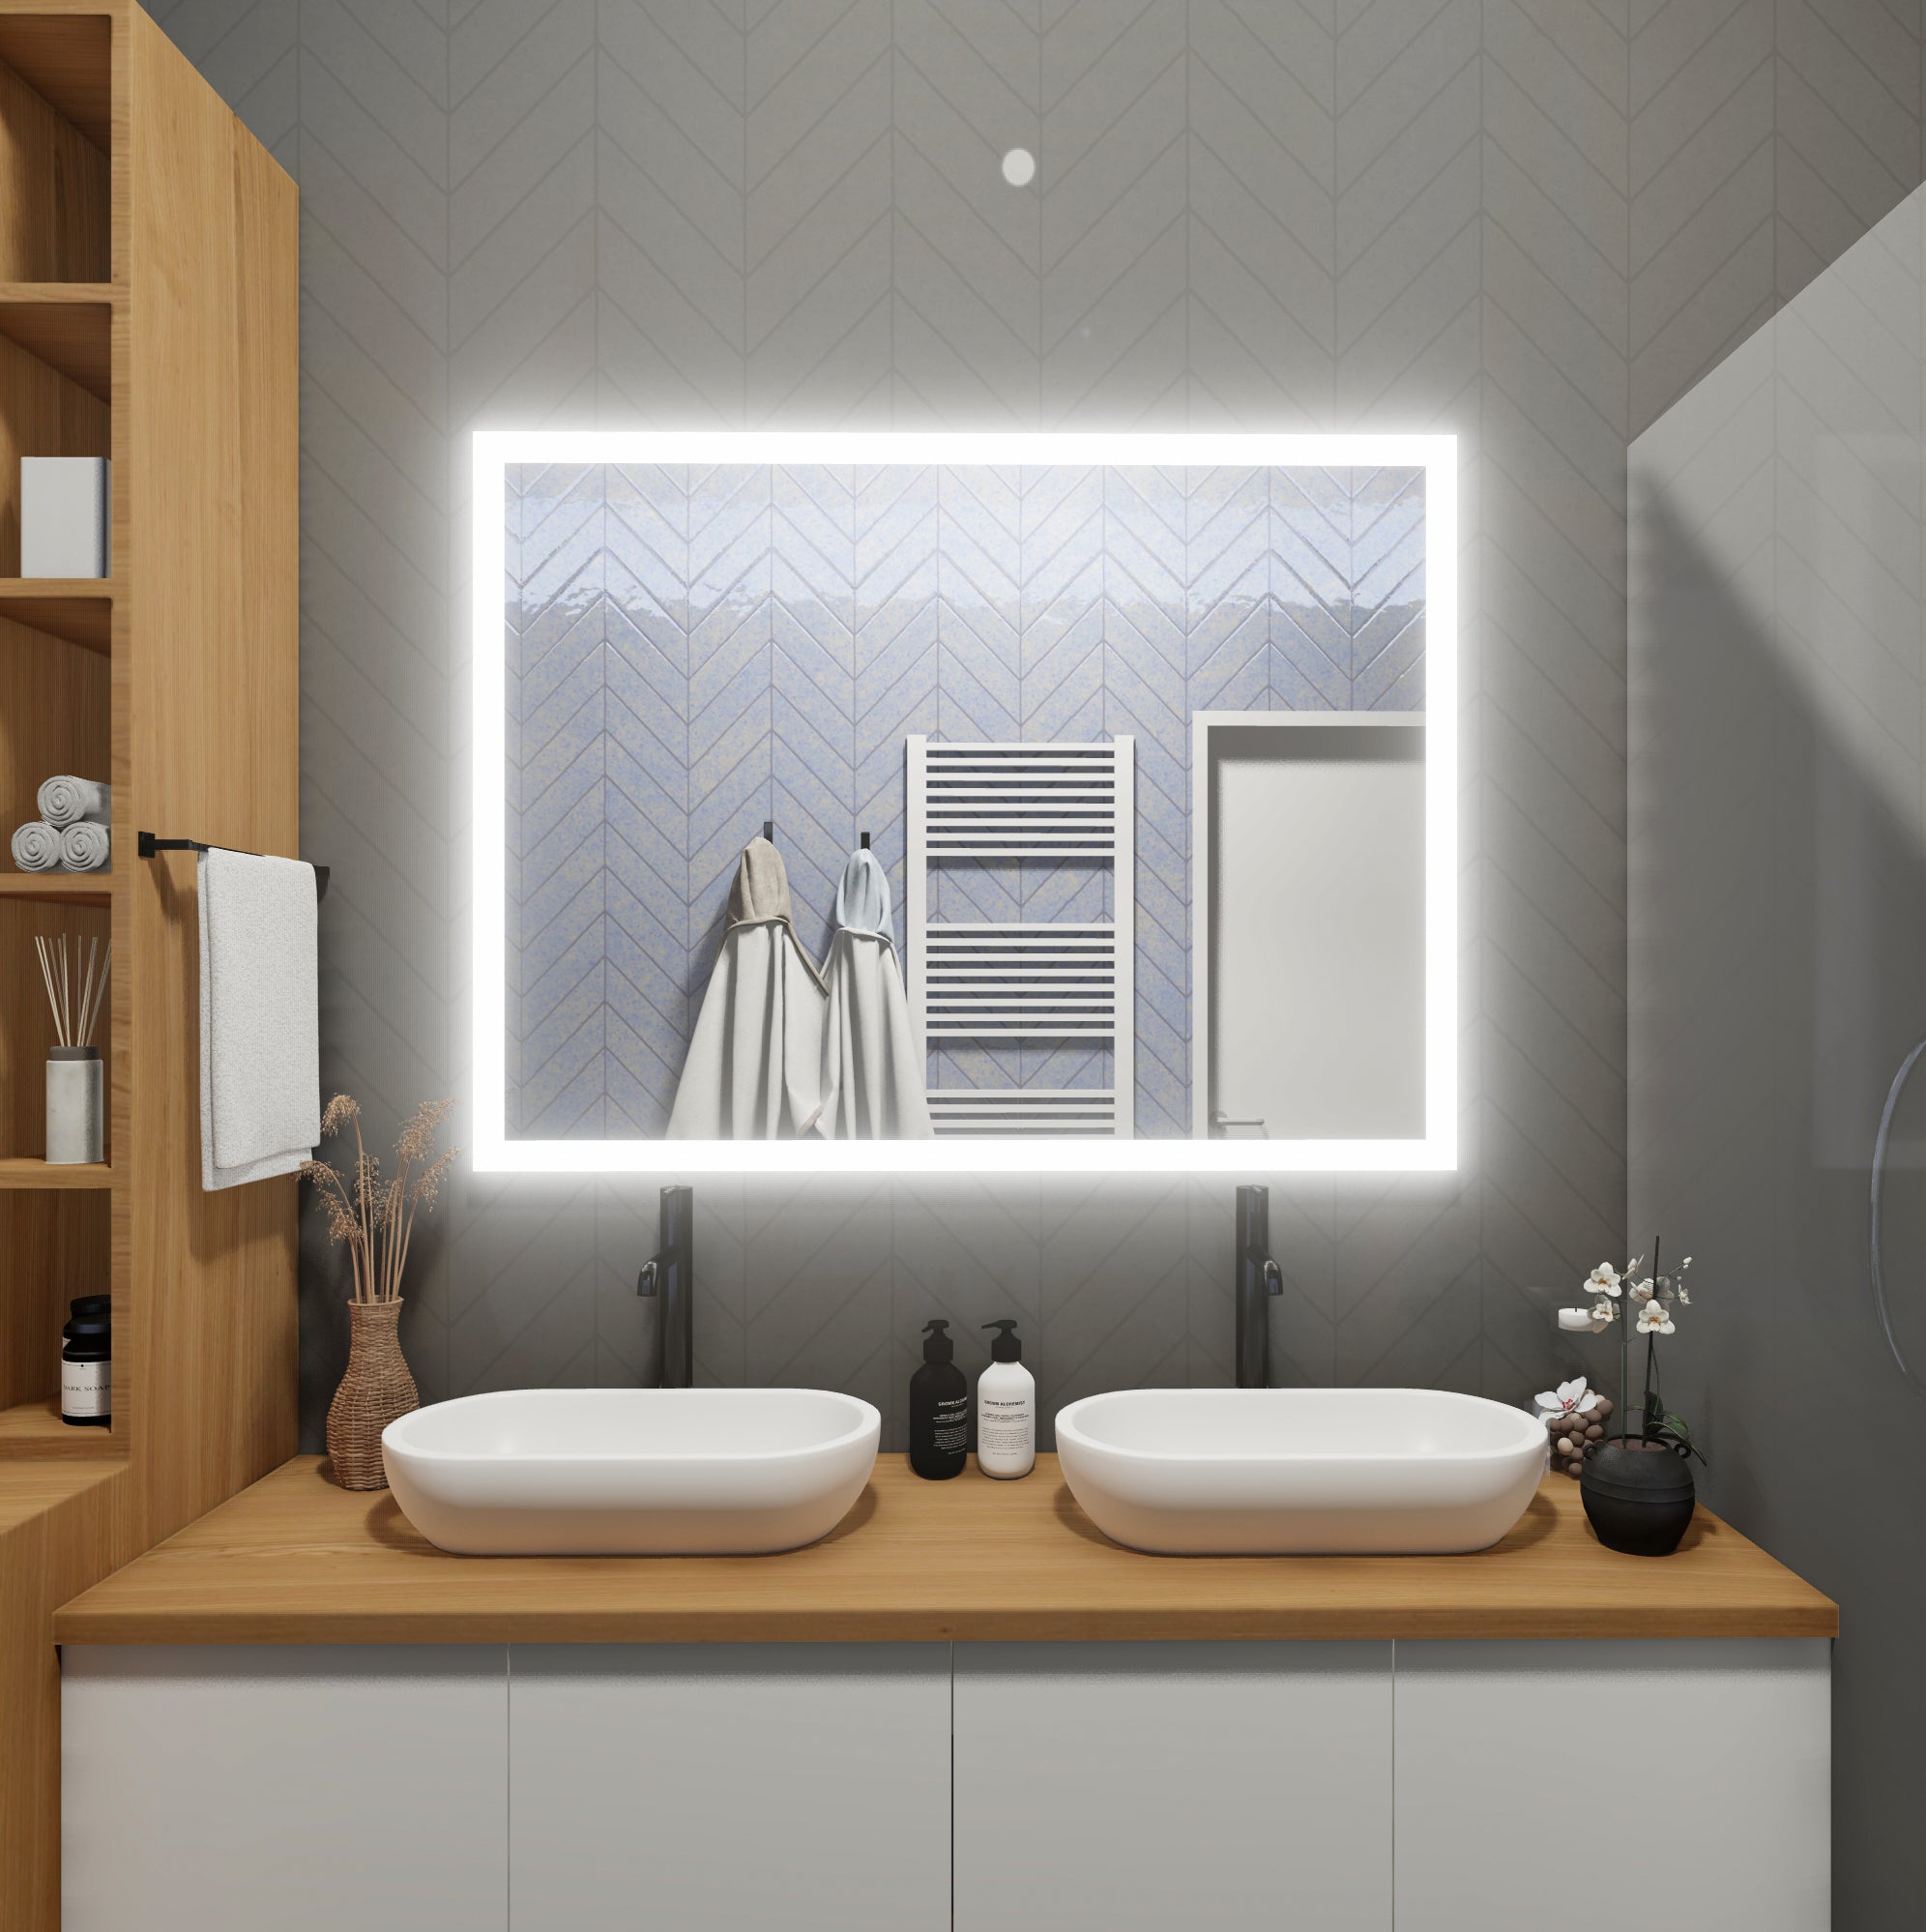 Are Lighted Mirrors Worth It?